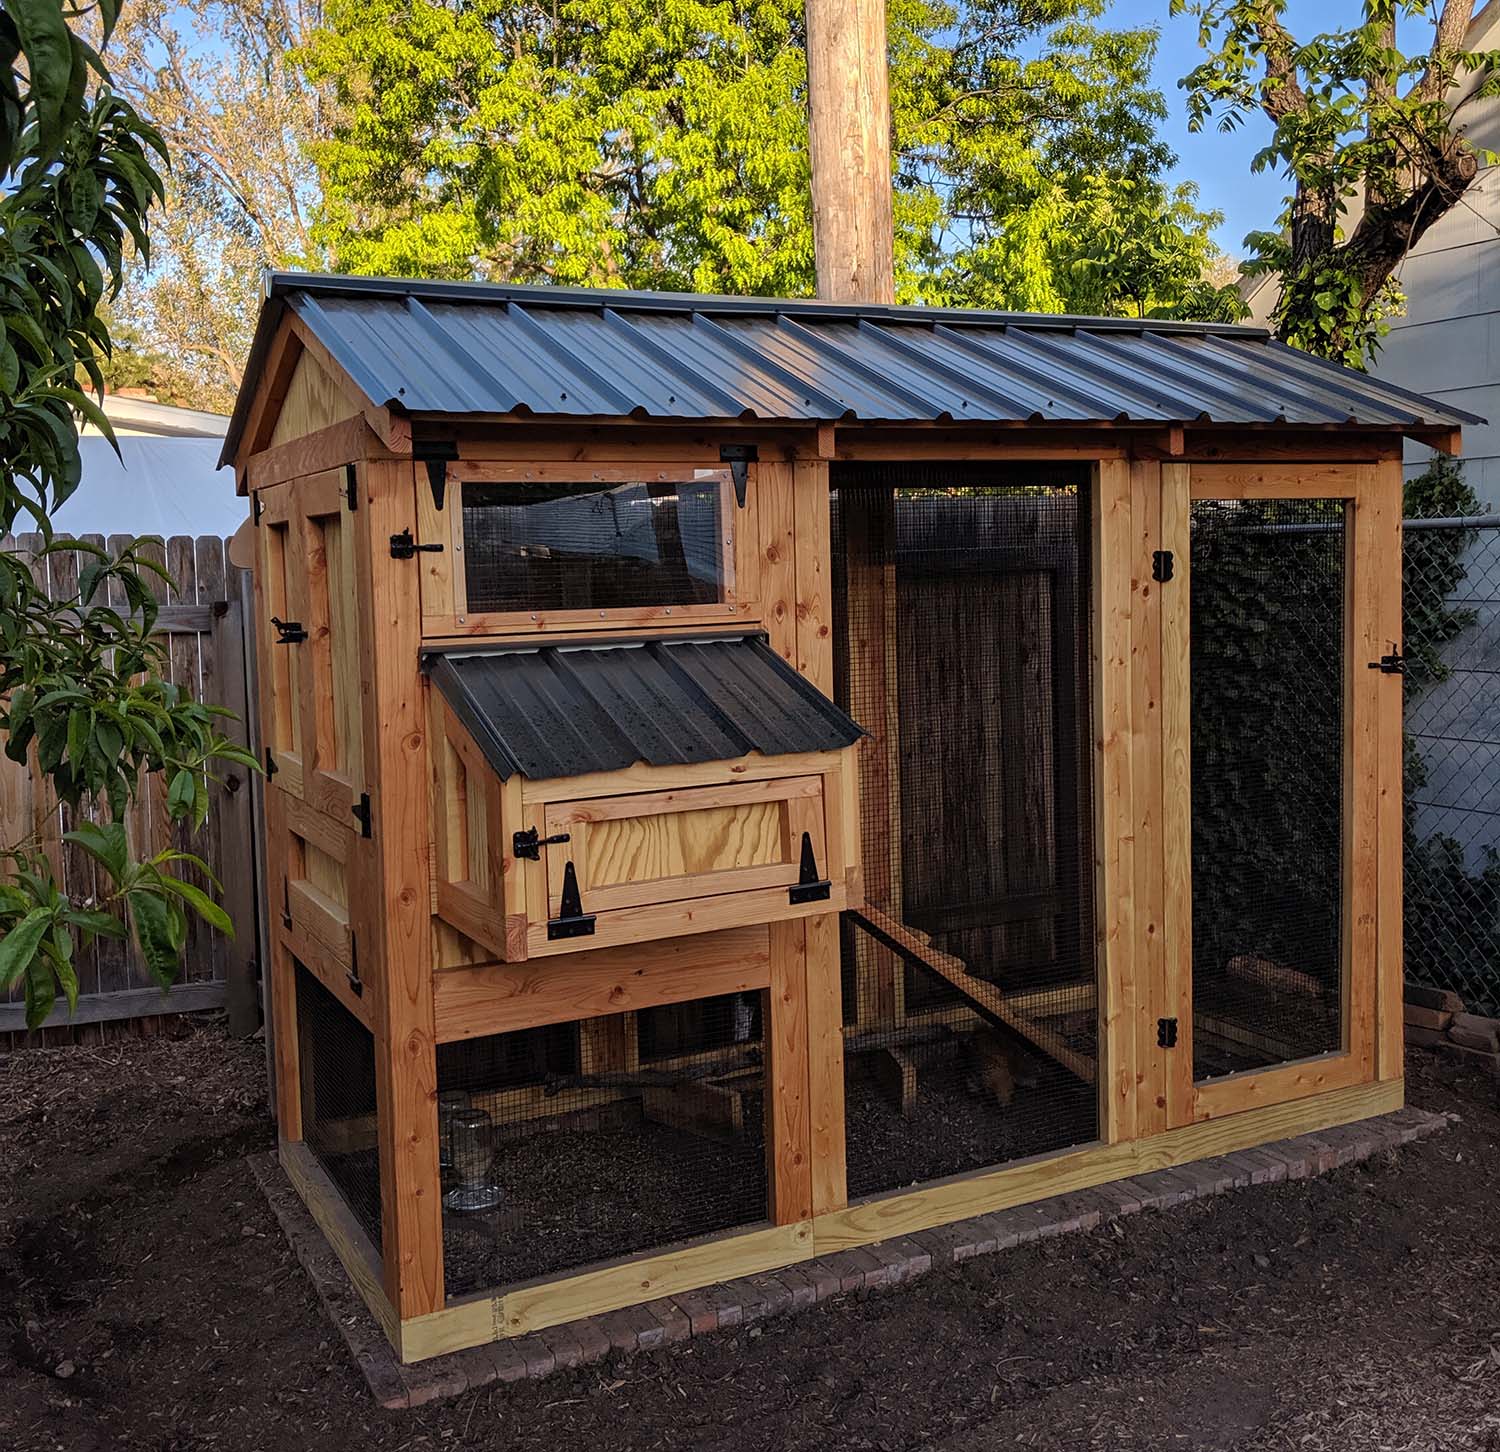 4′ x 9′ California Coop with 3′ x 4′ henhouse with black roof & hardware in Boise, Idaho